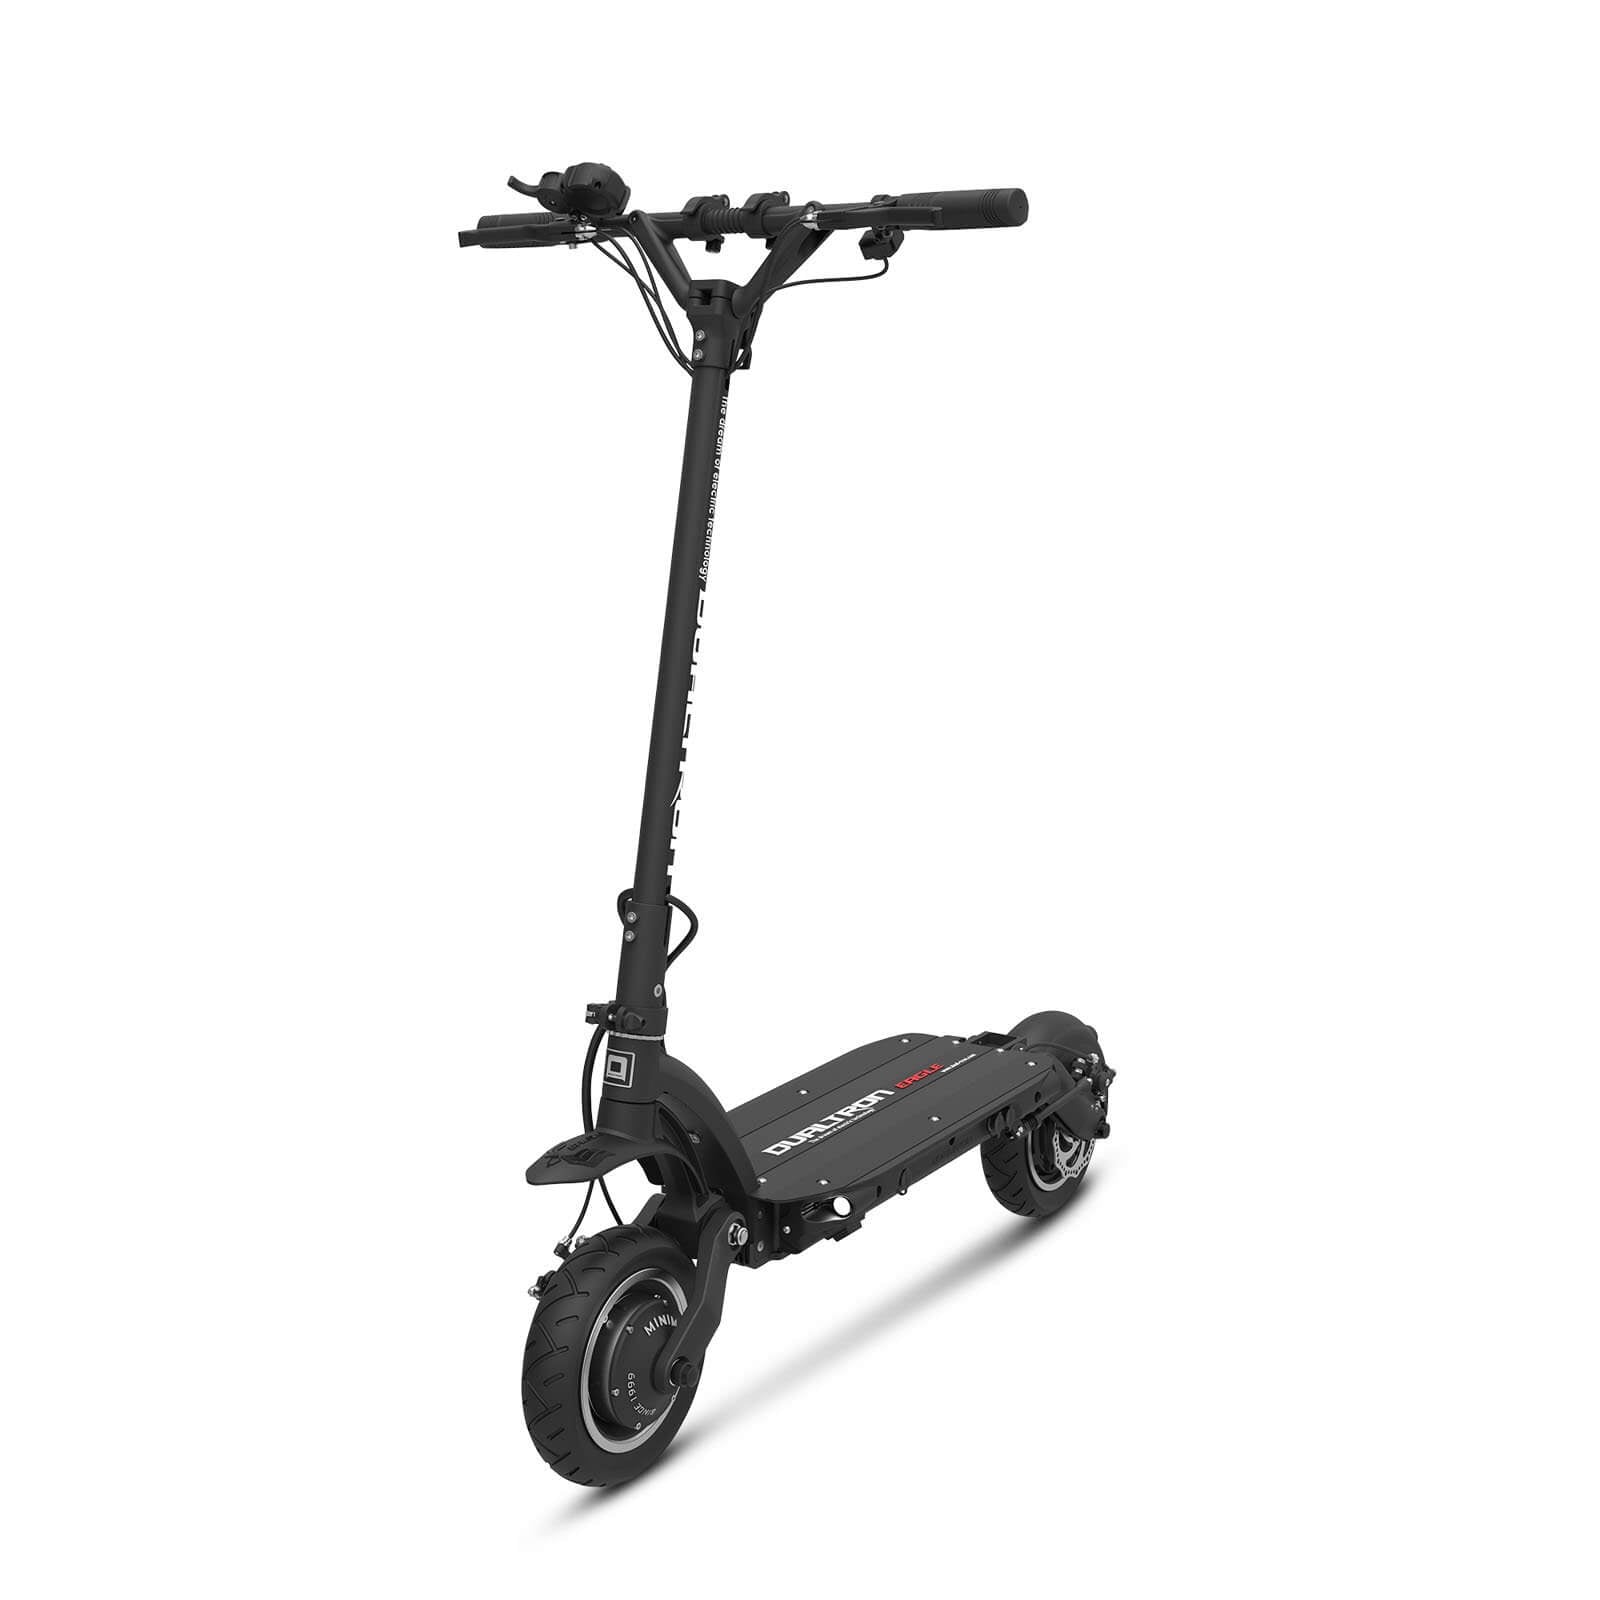 Dualtron Eagle Pro electric scooter - front angle view (left)